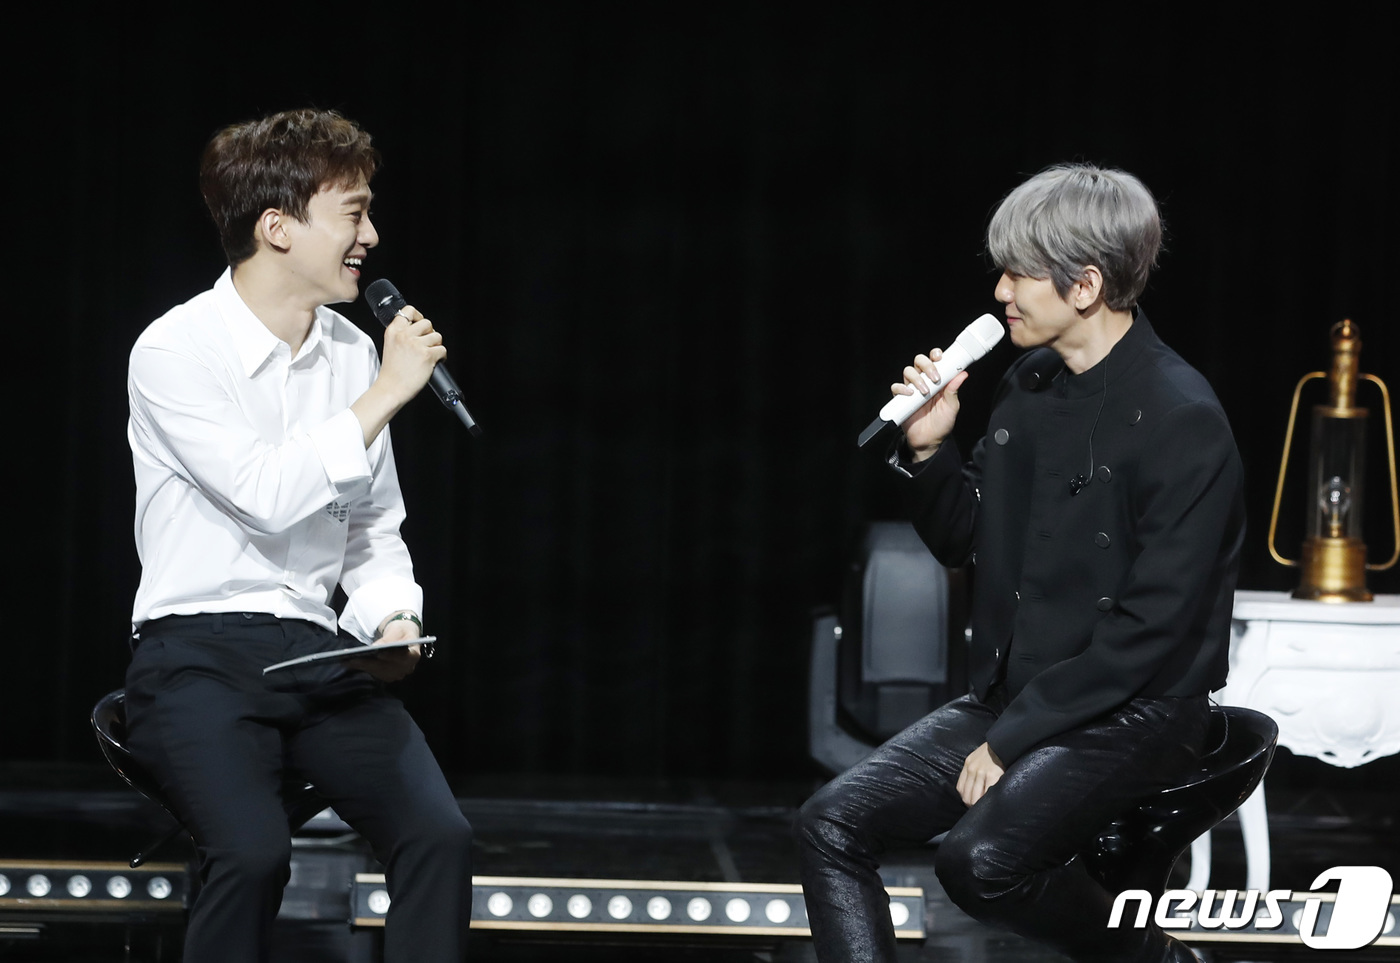 Baekhyun opened a showcase to commemorate the release of his first solo album City Lights at SAC Art Hall in Samsungro, Seoul on October 10 at 2 pm.I have been active in EXO and EXO Chenbak City for a while, but when I was a soloist, I was not burdened at first, said Baekhyun. I did not have a member to support and I had to make the stage alone.I am excited and excited about what it will be like to be released, he added. I thought I wanted to show it quickly.I have a total of six songs on this album, and my superpower is light in EXO, Baekhyun said, laughing, I made the album name City Lights with Baekhyuns identity.Baekhyun said, I can not believe it because it is an inconceivable number, he said, I think I should open it.It is an album that fans really waited for, he added. It is a song that I prepared hard because I thought about it as long as I waited.The title song UN Village is a romantic love song of R & B genre that can feel the soft vocals of Baekhyun. The music video is produced with a sensual image that combines the trendy atmosphere of the new song and will attract the attention of global music fans.The first thing I heard when I first heard it was the name of the villa, said Baekhyun. It is a place where the villas of Hannam-dong are gathered. When the members first heard it, they misunderstood it as a song of the princely Feelings.If you look at the house, it is Feelings who want to take you from the hill behind the UN Village and show you a good scenery, he added. It was very exciting and interesting.Regarding Lee Soo-mans comment, he said, The president has not responded to the group mobile messenger because he has gags. He said, I was hard to prepare for the album.I was embarrassed because the chairman, who met me since then, asked me why I did not reply, he said. But he liked me to listen to my song every day.If EXO appeals to sexy through intense performance, my solo album seems to appeal to sexy with my voice, Baekhyun said of the difference between EXO and solo album.Also on this album is R & B Stay Up, which is featured by rapper Beenzino, hip-hop R & B Betcha with a cute and confident artifact of a man who is convinced of fateful love, Ice Queen of R & B genre to win her love with cold heart with her warm heart, and R & B ballad B Ballard Ond , and a total of six songs, including a bonus track Psycho, which expresses the lost inner side among emotions that are difficult to handle.Baekhyun said, In fact, as soon as I heard this song, I thought of Beenzino a lot, he said. I did not have any personal friends, but I asked him to accept it.He also said that he did not participate in writing and composing on this album, There were many people who were better than me. I have done it once, but I have not looked back since the company.So I thought this road was not my way. I thought it was a priority to show stability as a player rather than participate in songwriting, Baekhyun added.Baekhyun will be on KBS 2TV Music Bank, Yoo Hee-yeols Sketchbook and MBC show on the 13th.Music center and SBS popular song on the 14th, and present the title song UN Village stage.